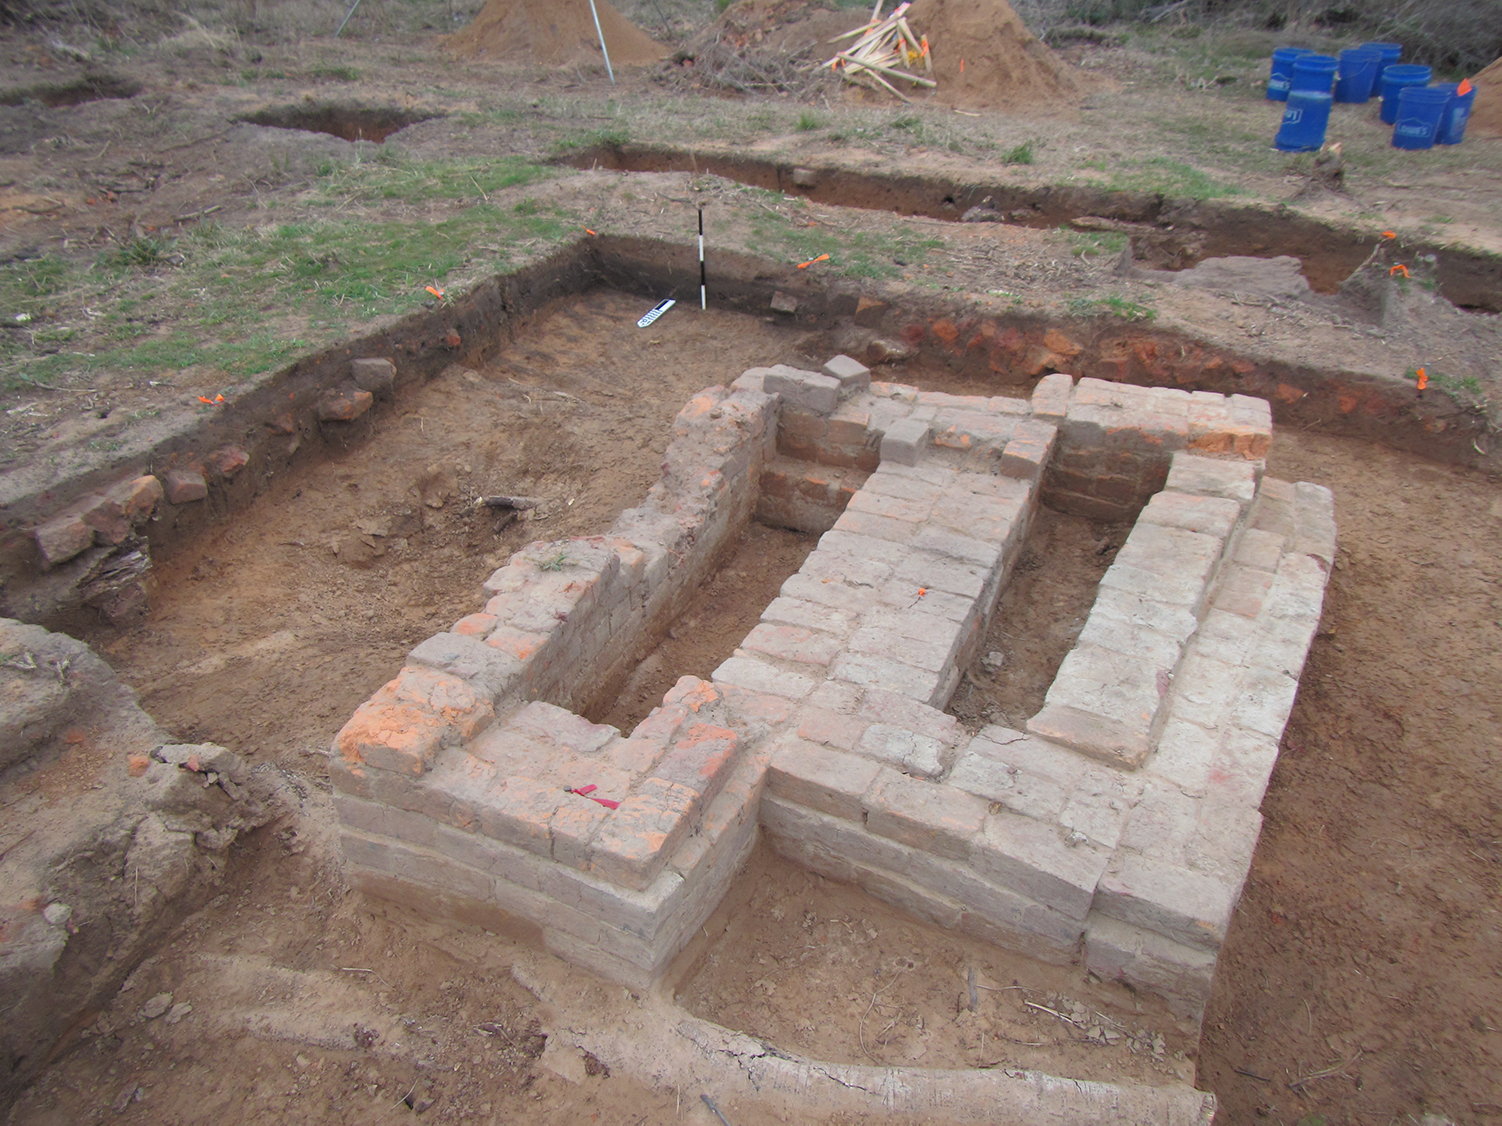 photo of excavation area mostly covered by patterns of bricks representing a chimney base.